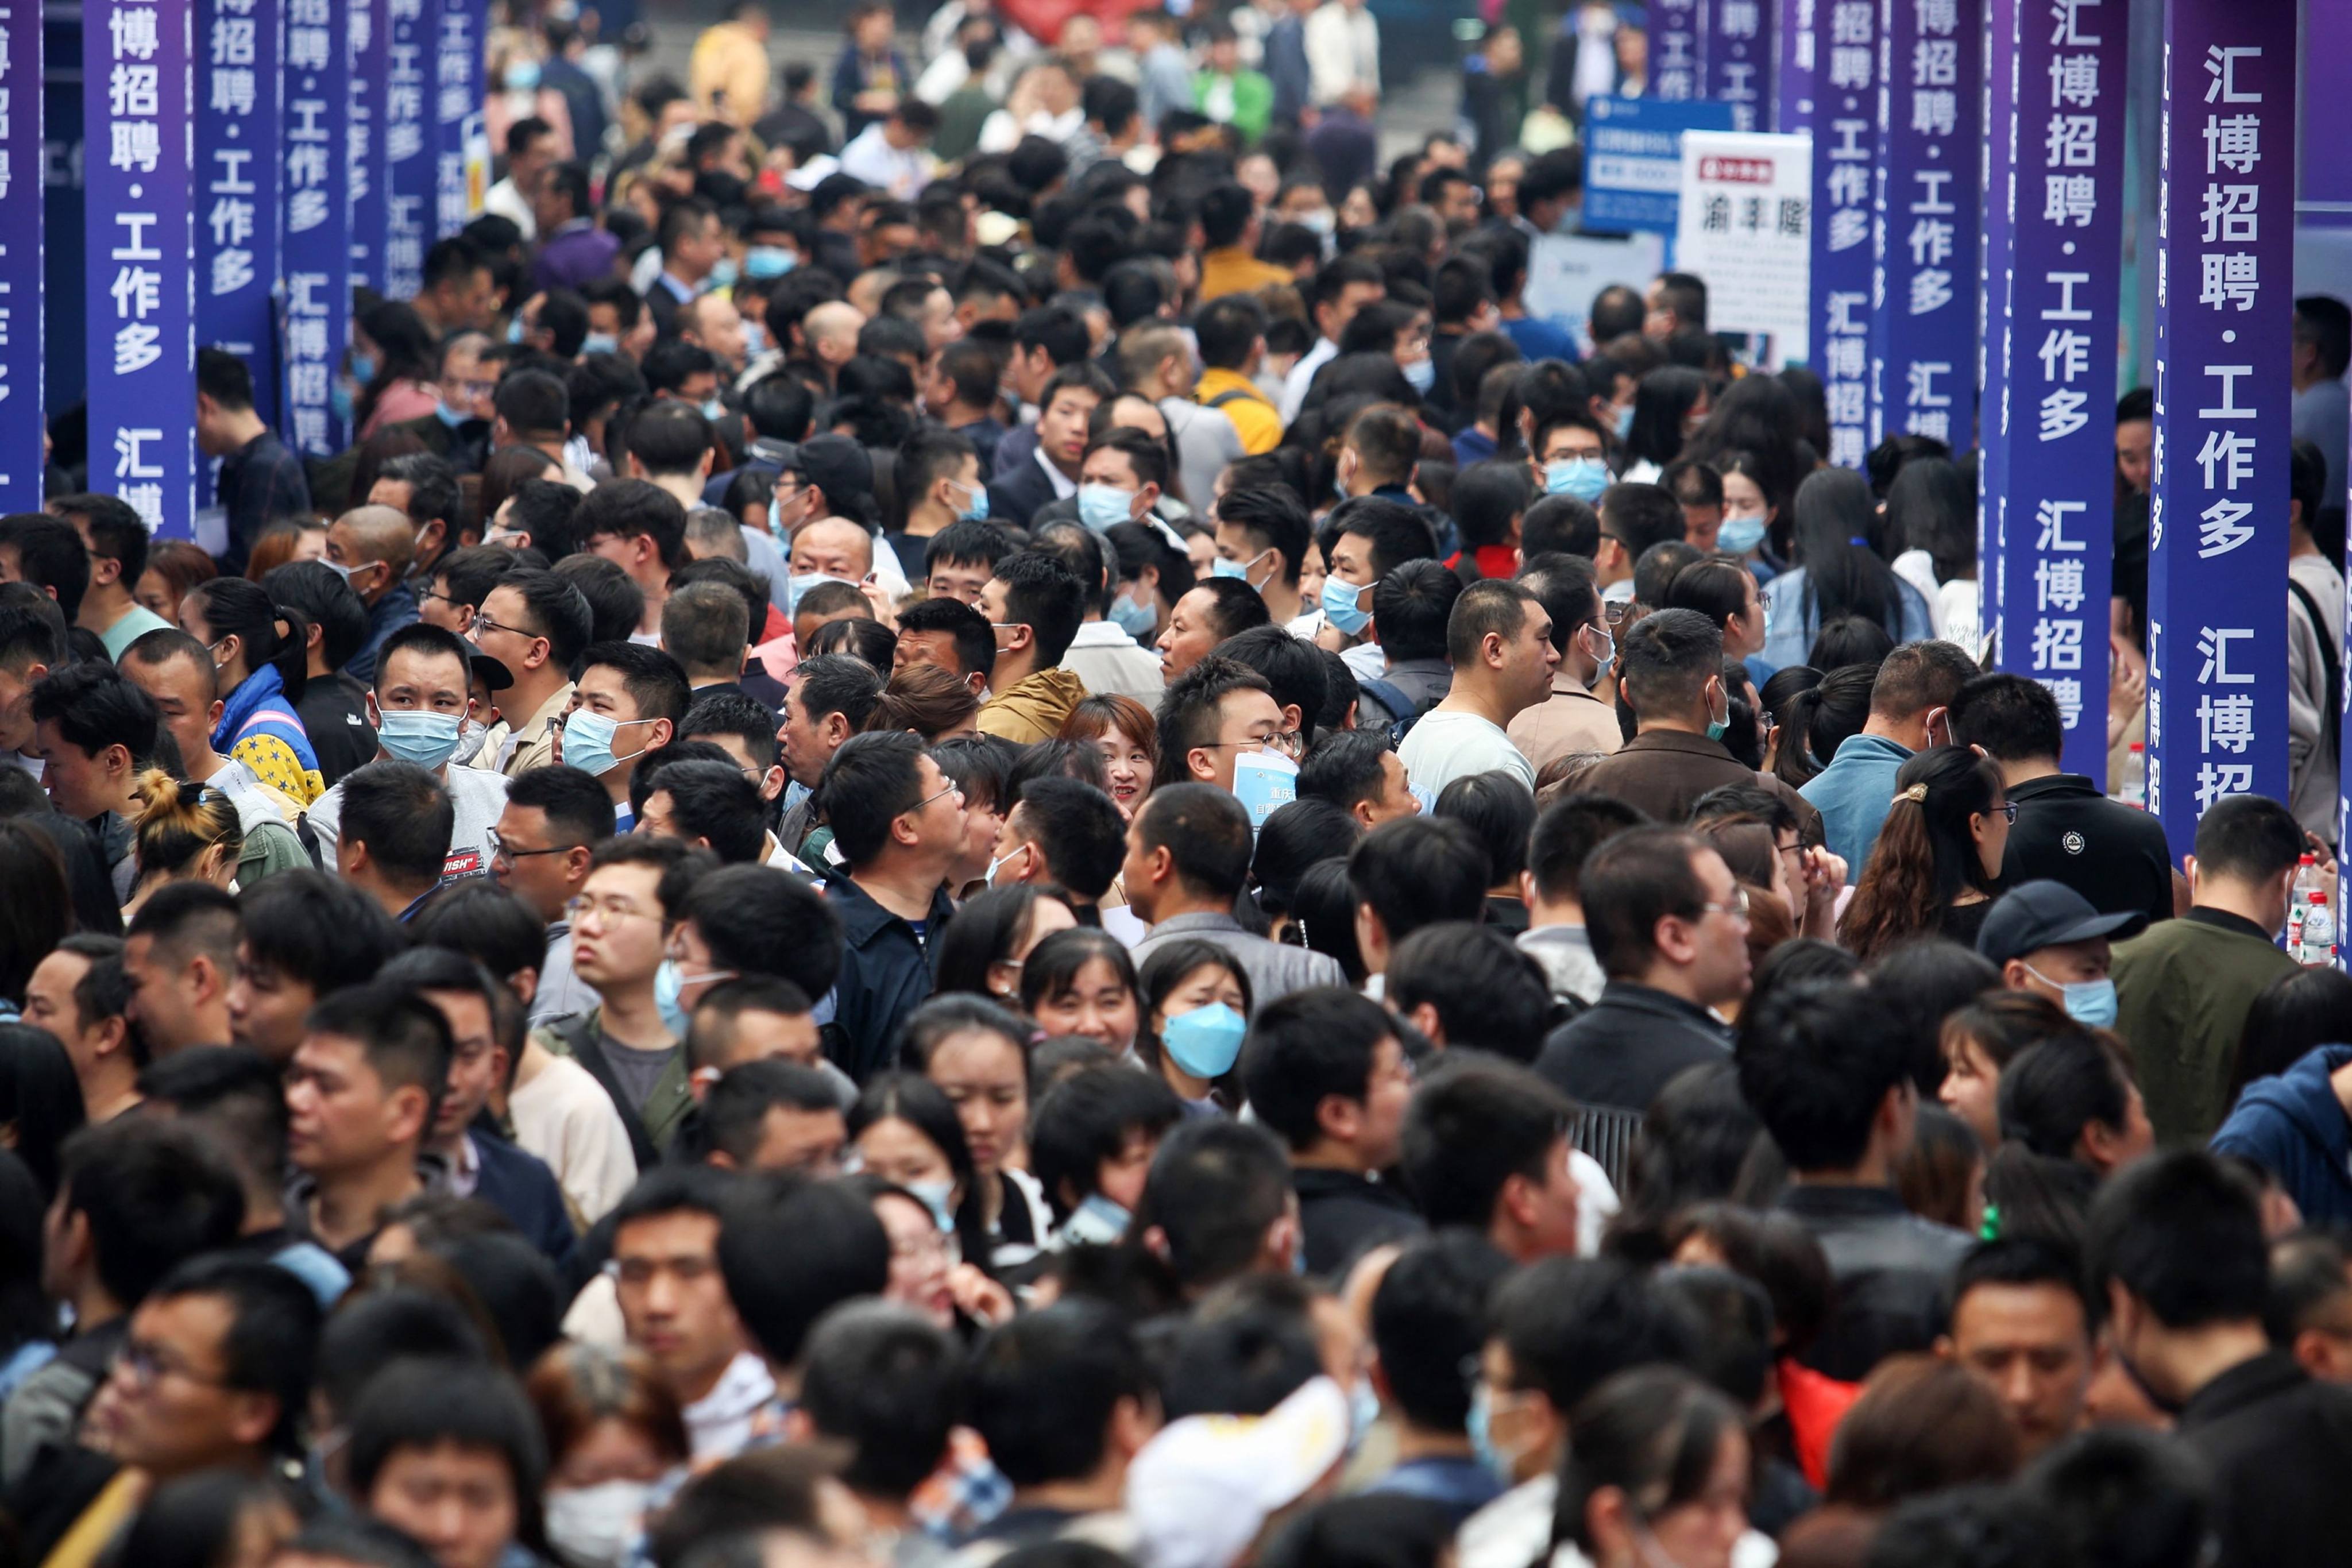 People attend a job fair in Chongqing on April 11. China’s reopening, after abandoning its zero-Covid policy, sets it apart from a world economy facing a significant risk of a hard landing this year. Photo: AFP